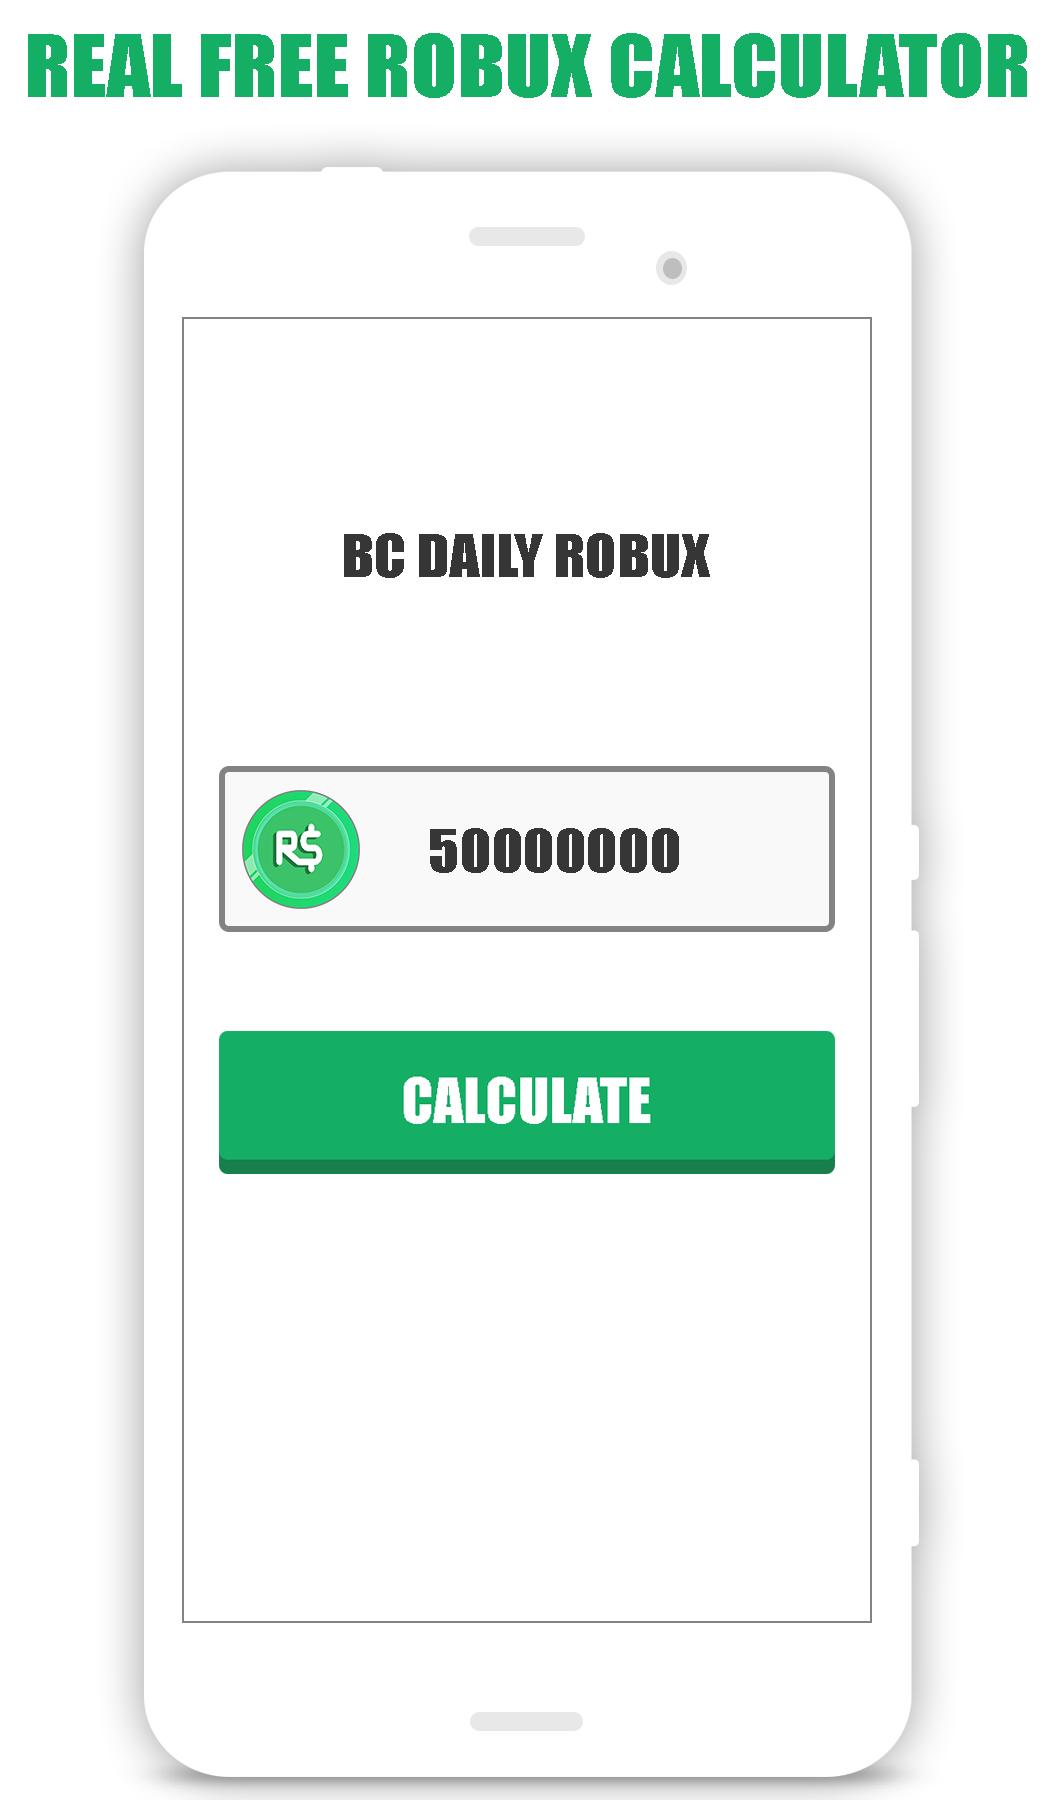 Free Robux Calculator For Roblox For Android Apk Download - roblox free robux bc